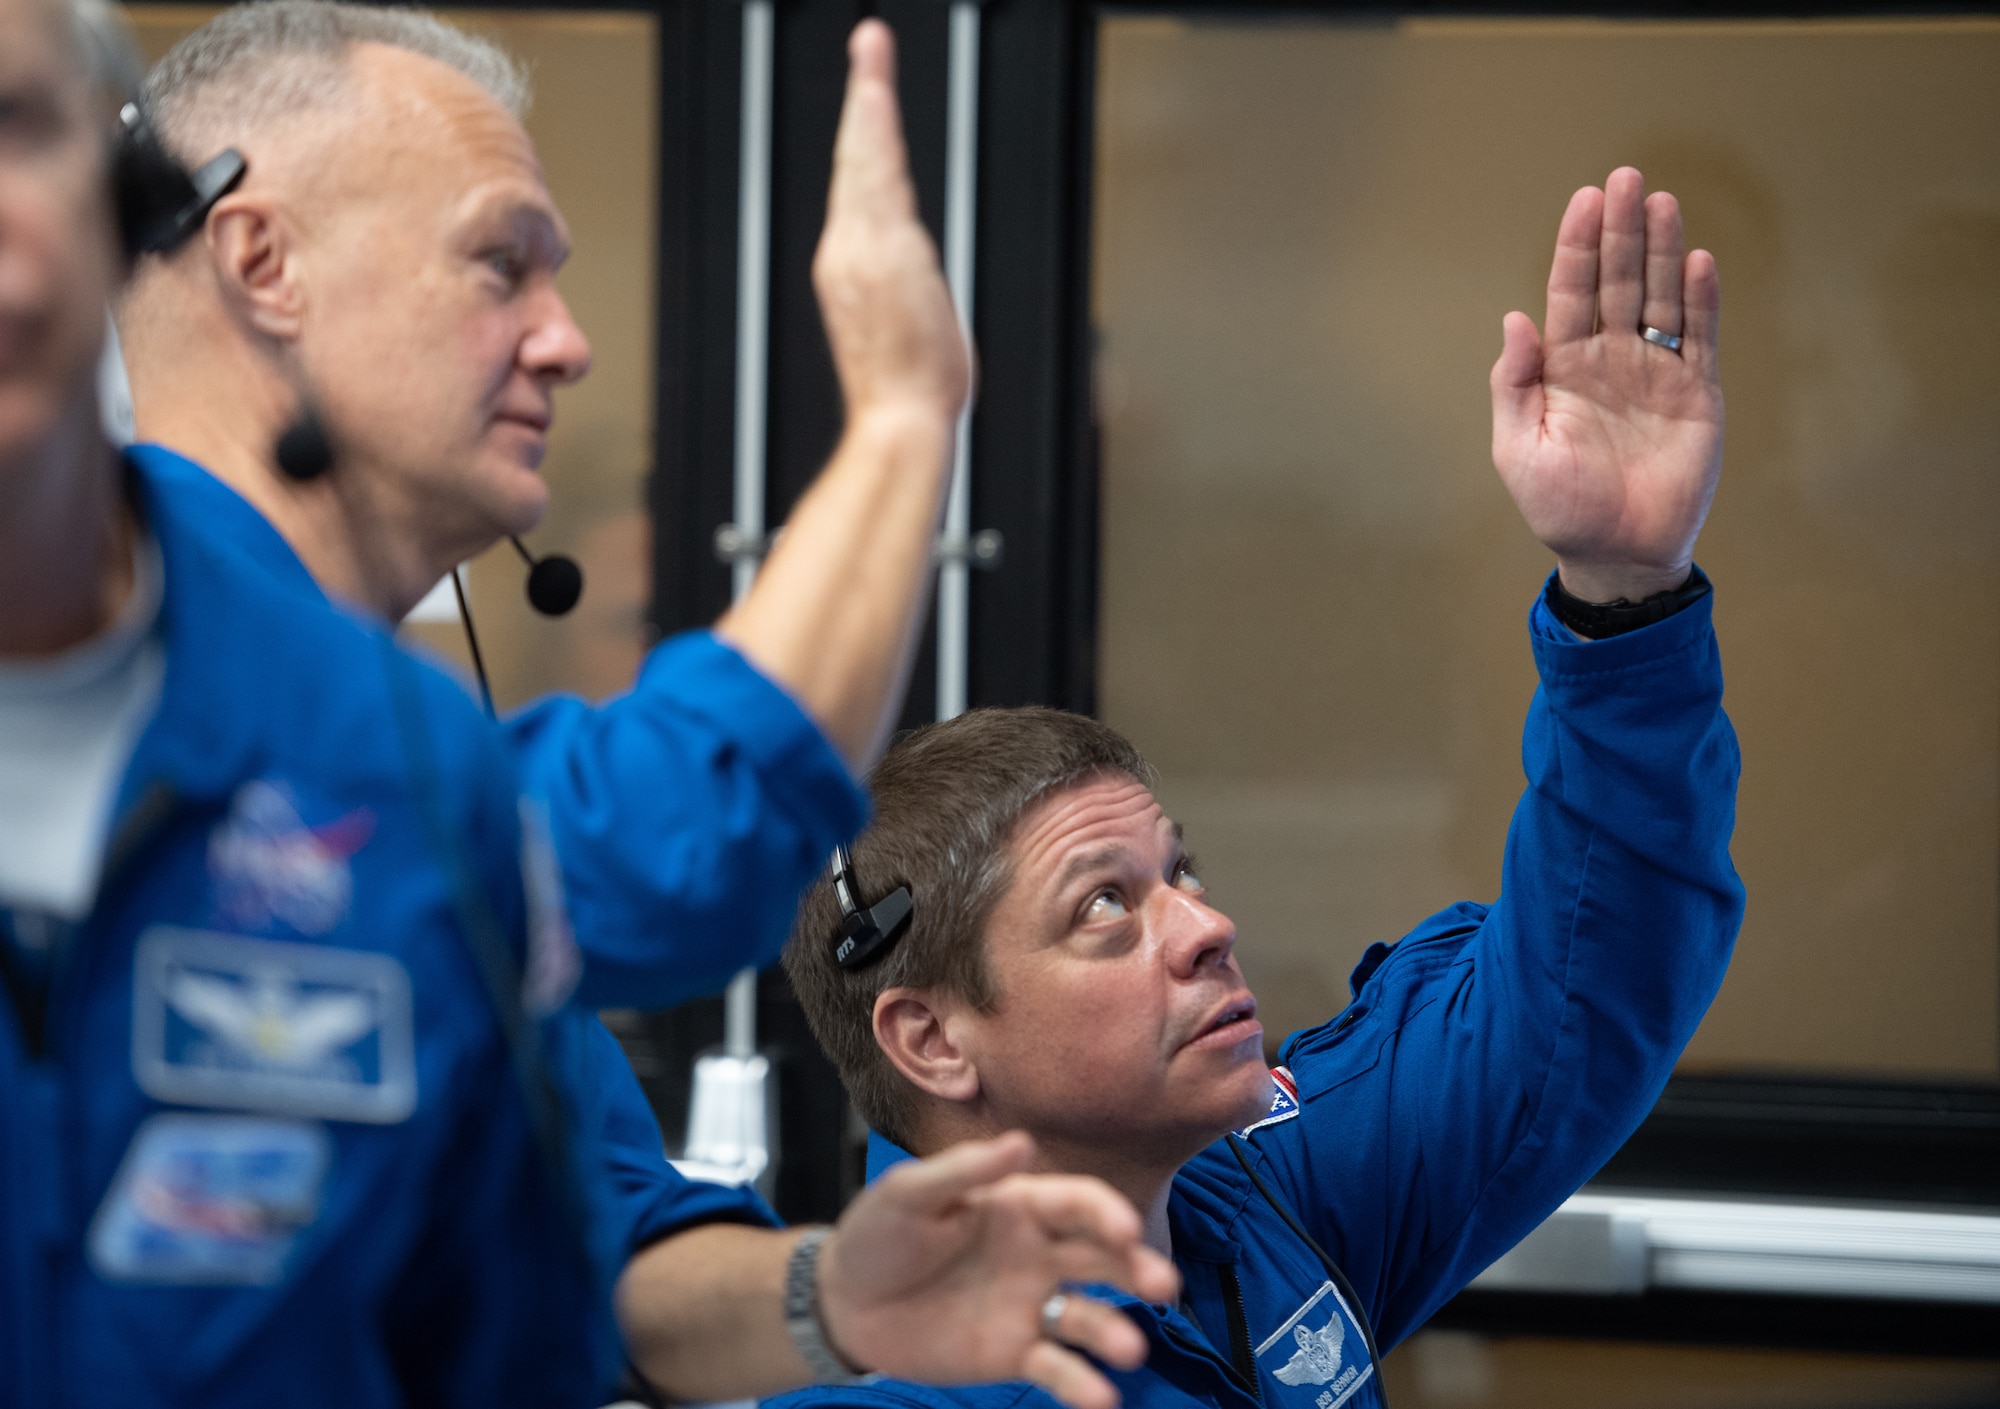 NASA astronauts Doug Hurley, left, and Bob Behnken, right, who are assigned to fly on the crewed Demo-2 mission, watch the launch of a SpaceX Falcon 9 rocket carrying the company's Crew Dragon spacecraft on the Demo-1 mission from firing room four of the Launch Control Center, Saturday, March 2, 2019 at the Kennedy Space Center in Florida. The Demo-1 mission will be the first launch of a commercially built and operated American spacecraft and space system designed for humans as part of NASA's Commercial Crew Program. The mission will serve as an end-to-end test of the system's capabilities.